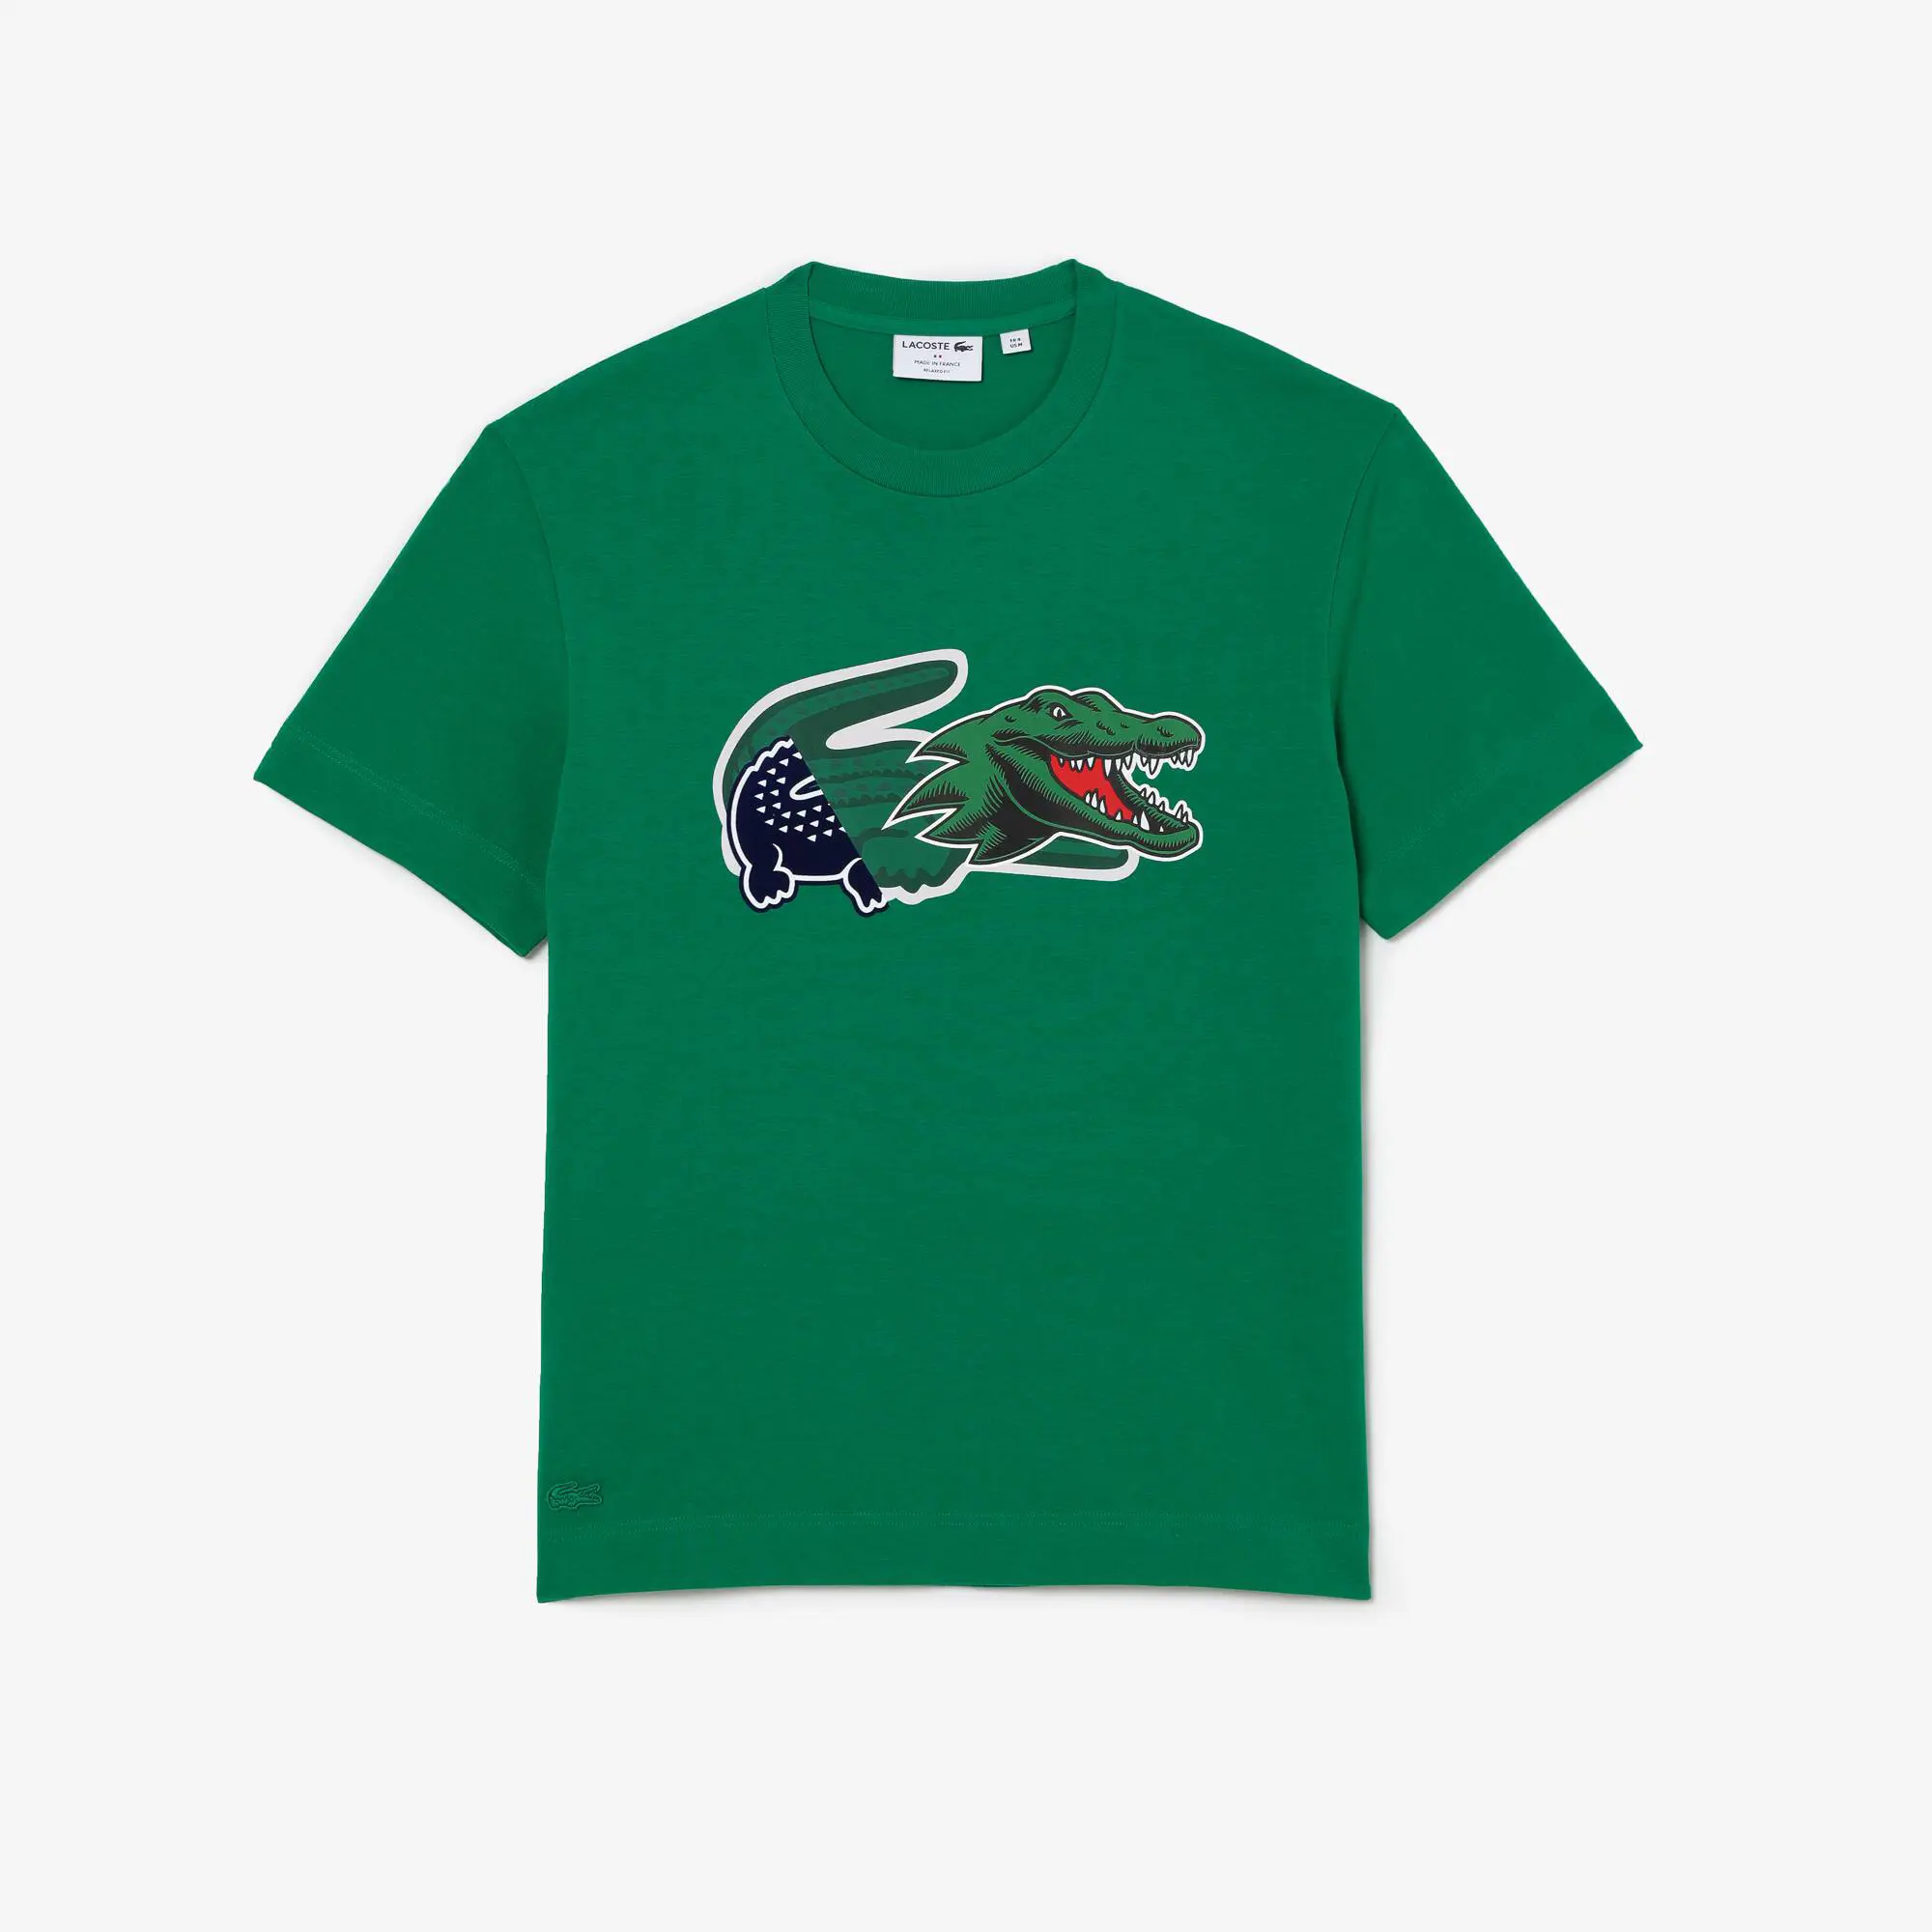 Lacoste T-shirt relaxed fit com crocodilo oversize Holiday para homem. 2